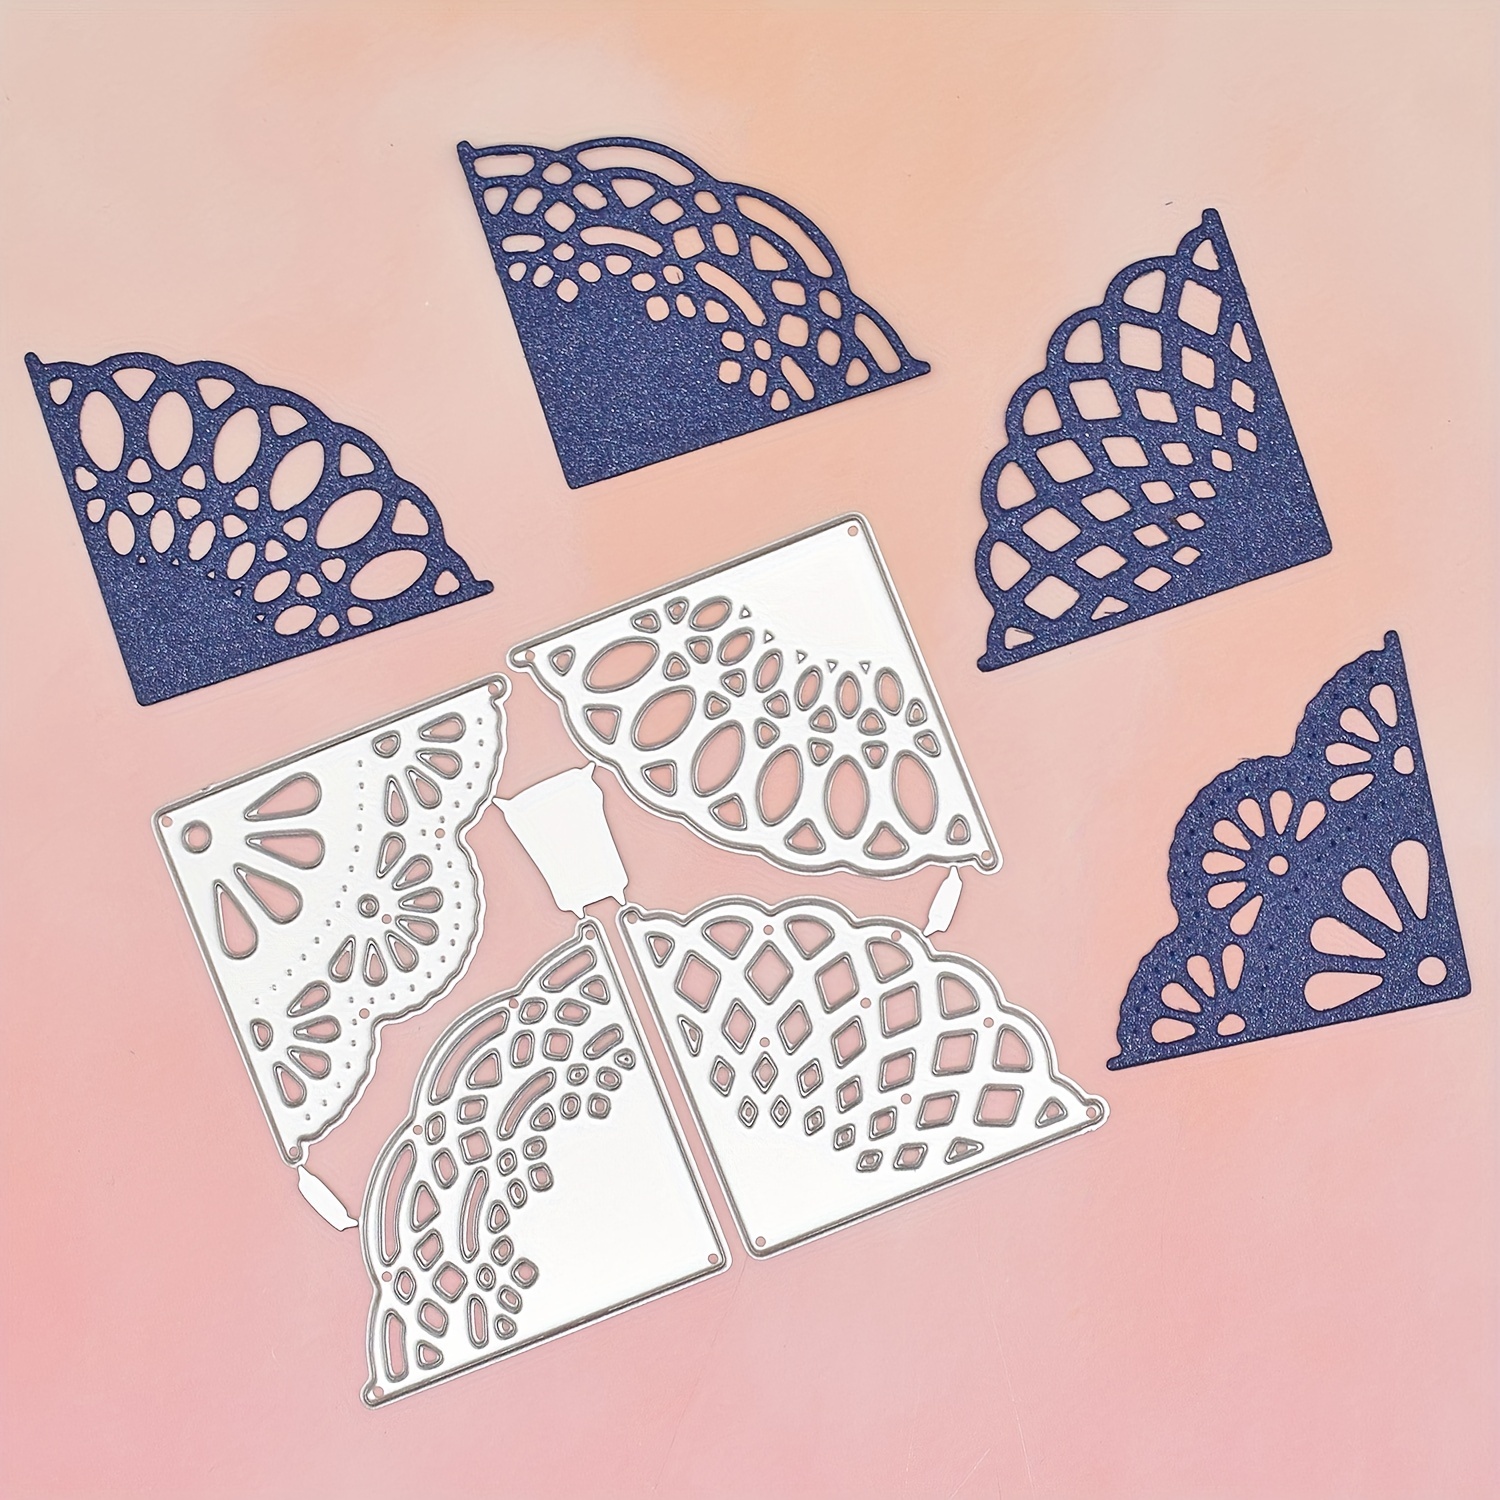 Butterfly Lace Edge Metal Die Cuts for Card Making,Spring Flower Butterfly  Border Card Cutting Dies Cut Stencils DIY Scrapbooking Album Decorative